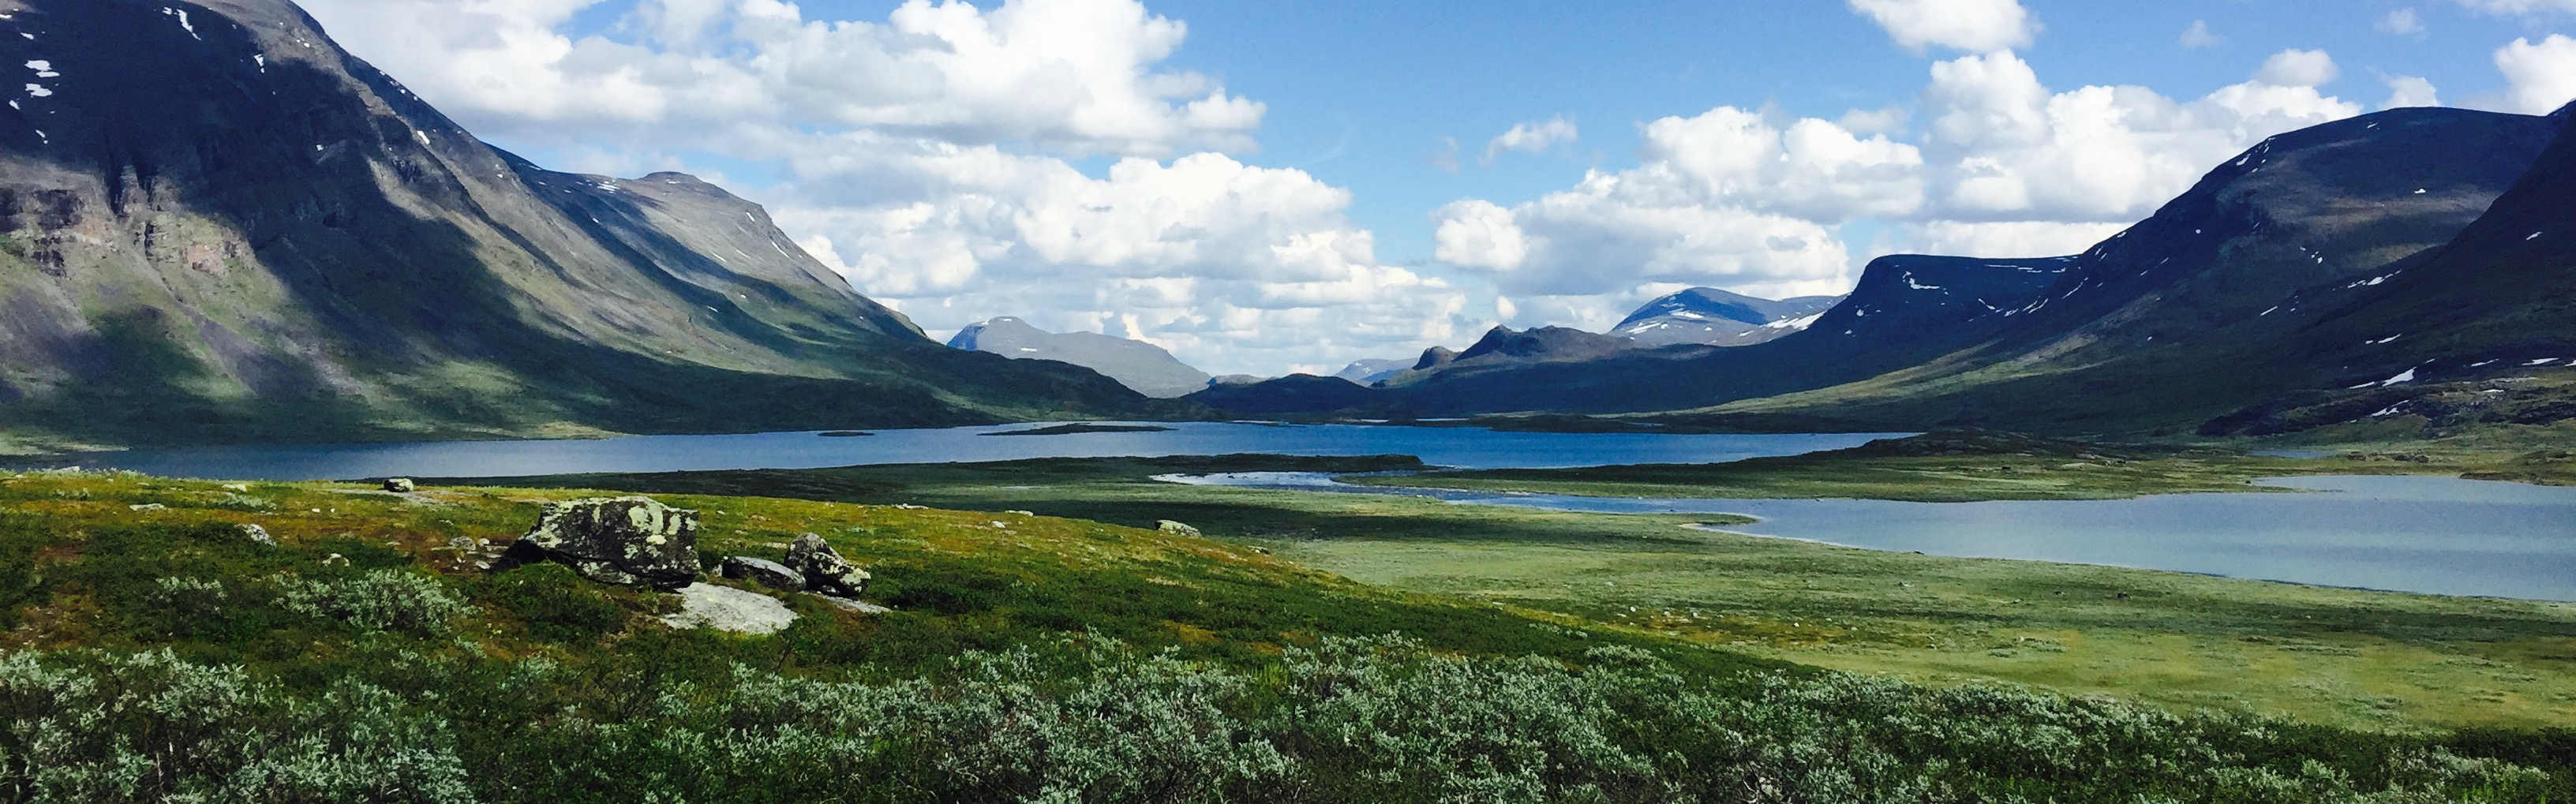 The Alesjaure valley on the Kungsleden